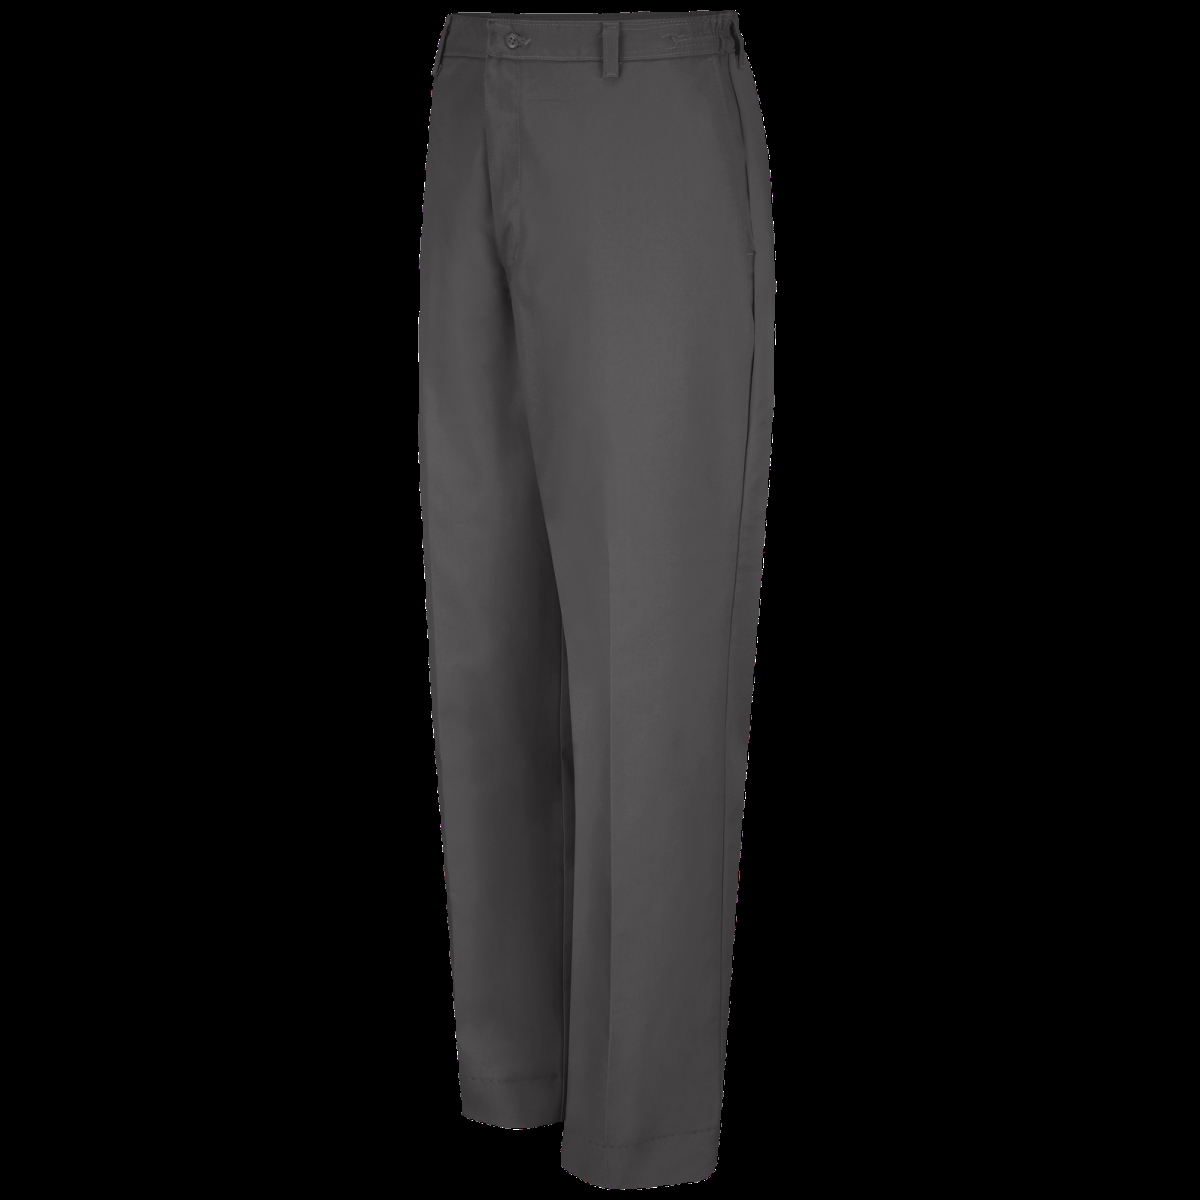 Picture of Red Kap B35430174 Elastic Insert Work Pants, Charcoal - 37 Unhemmed - Size 36W